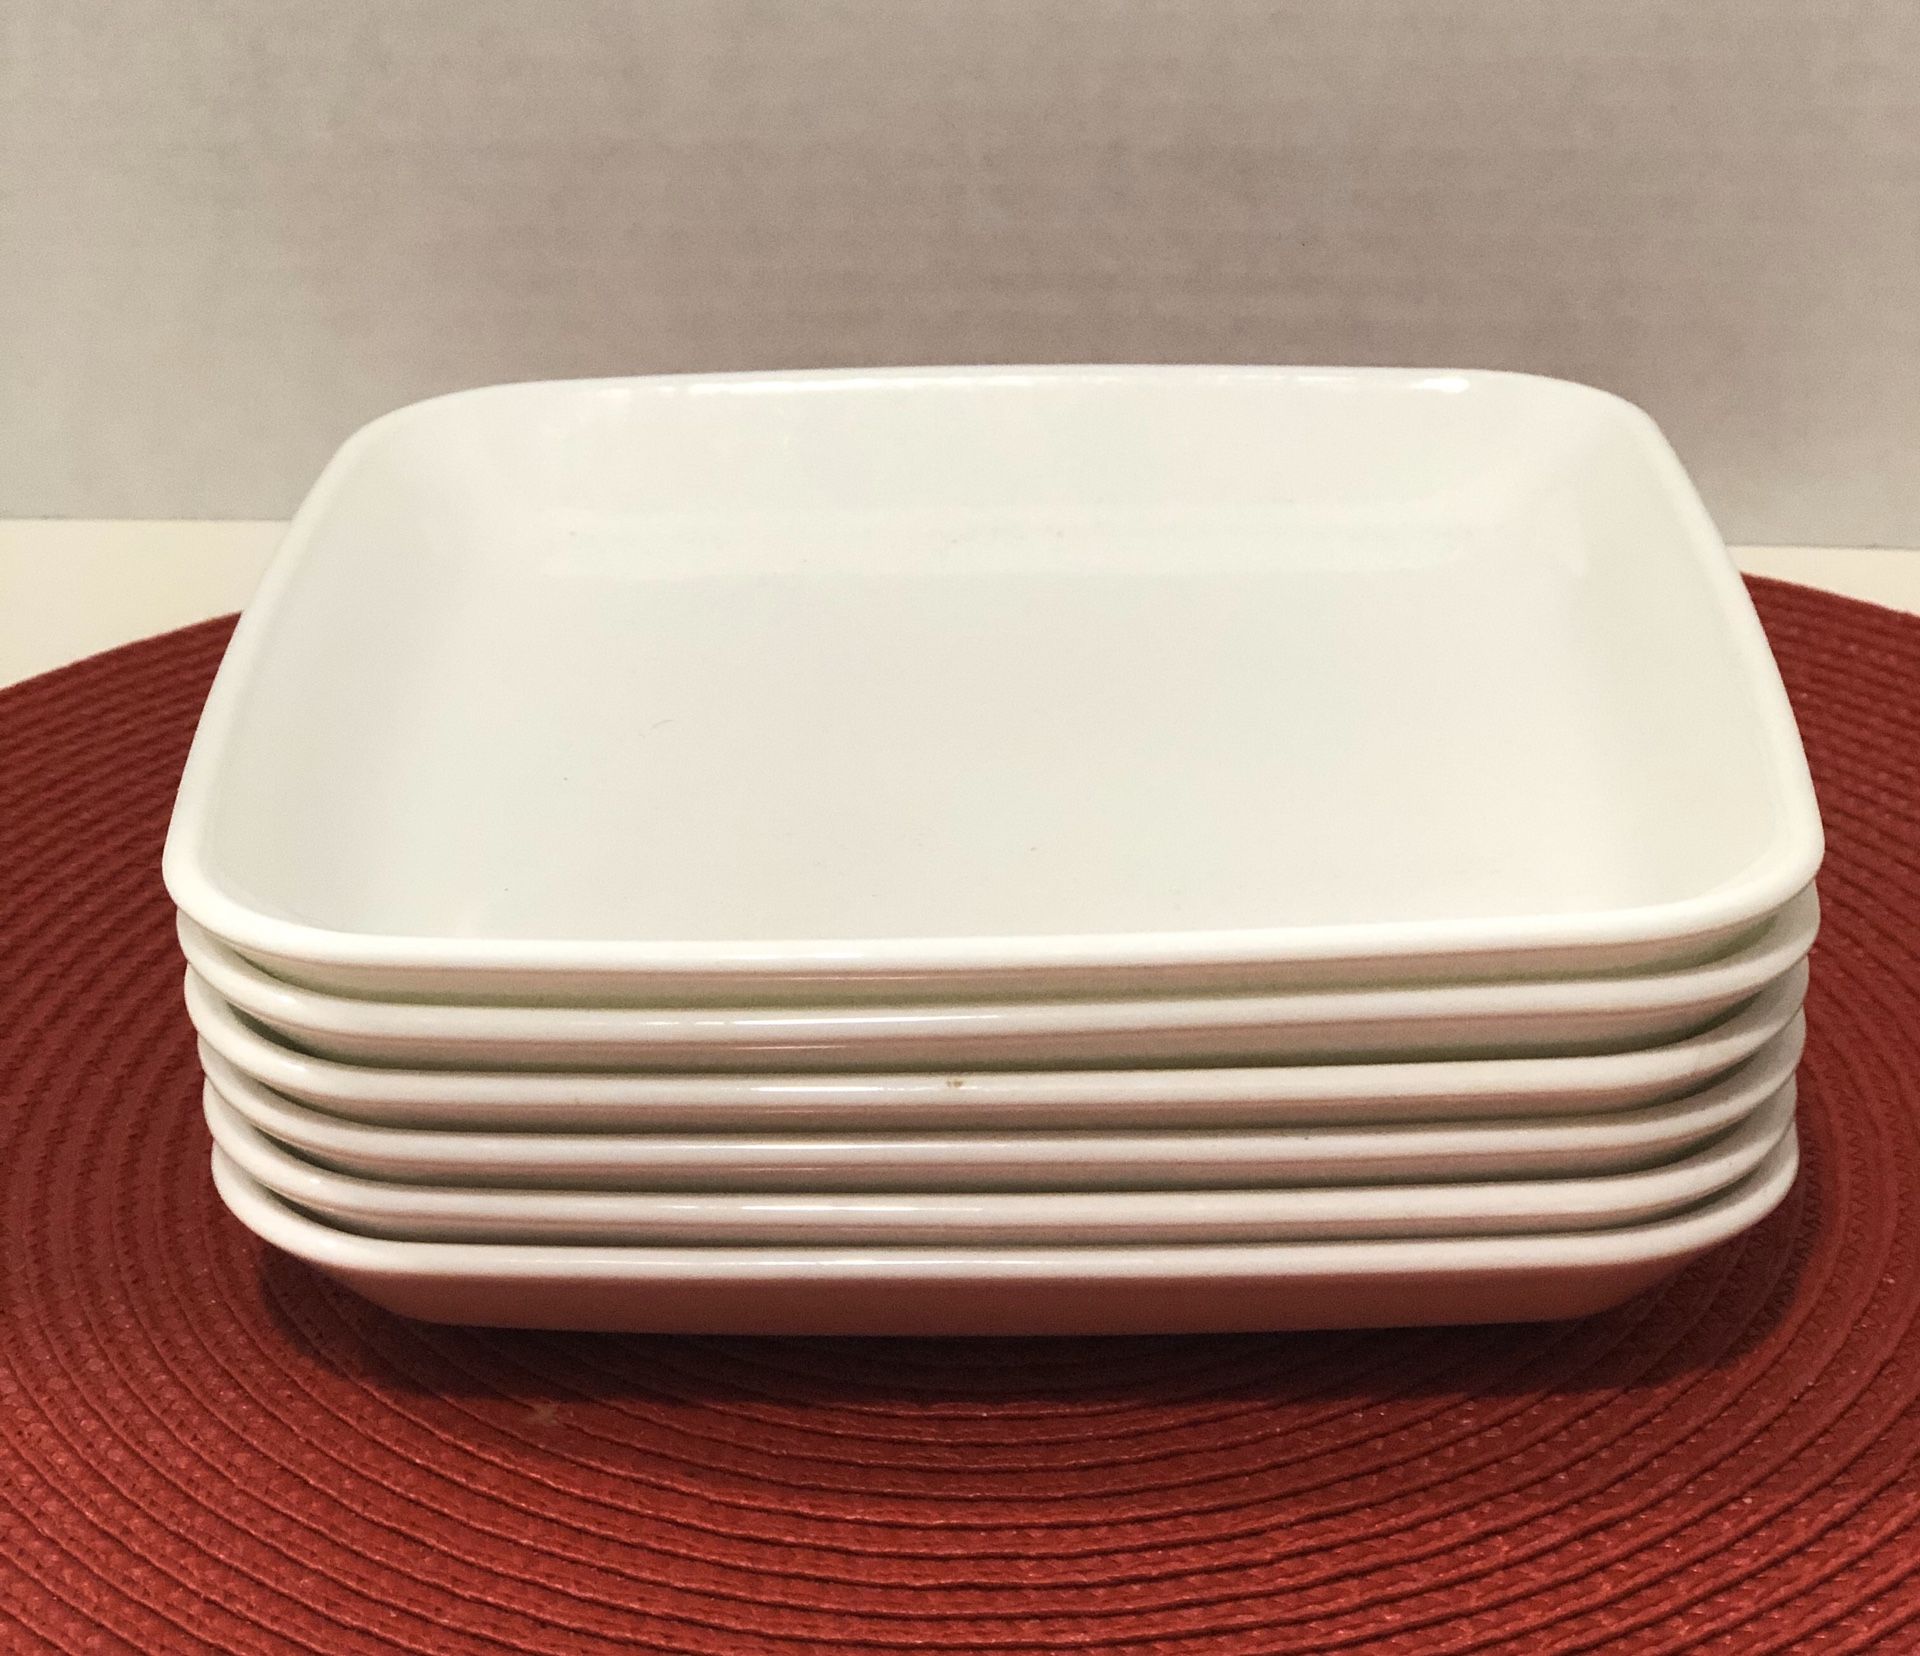 Pyrex dishes